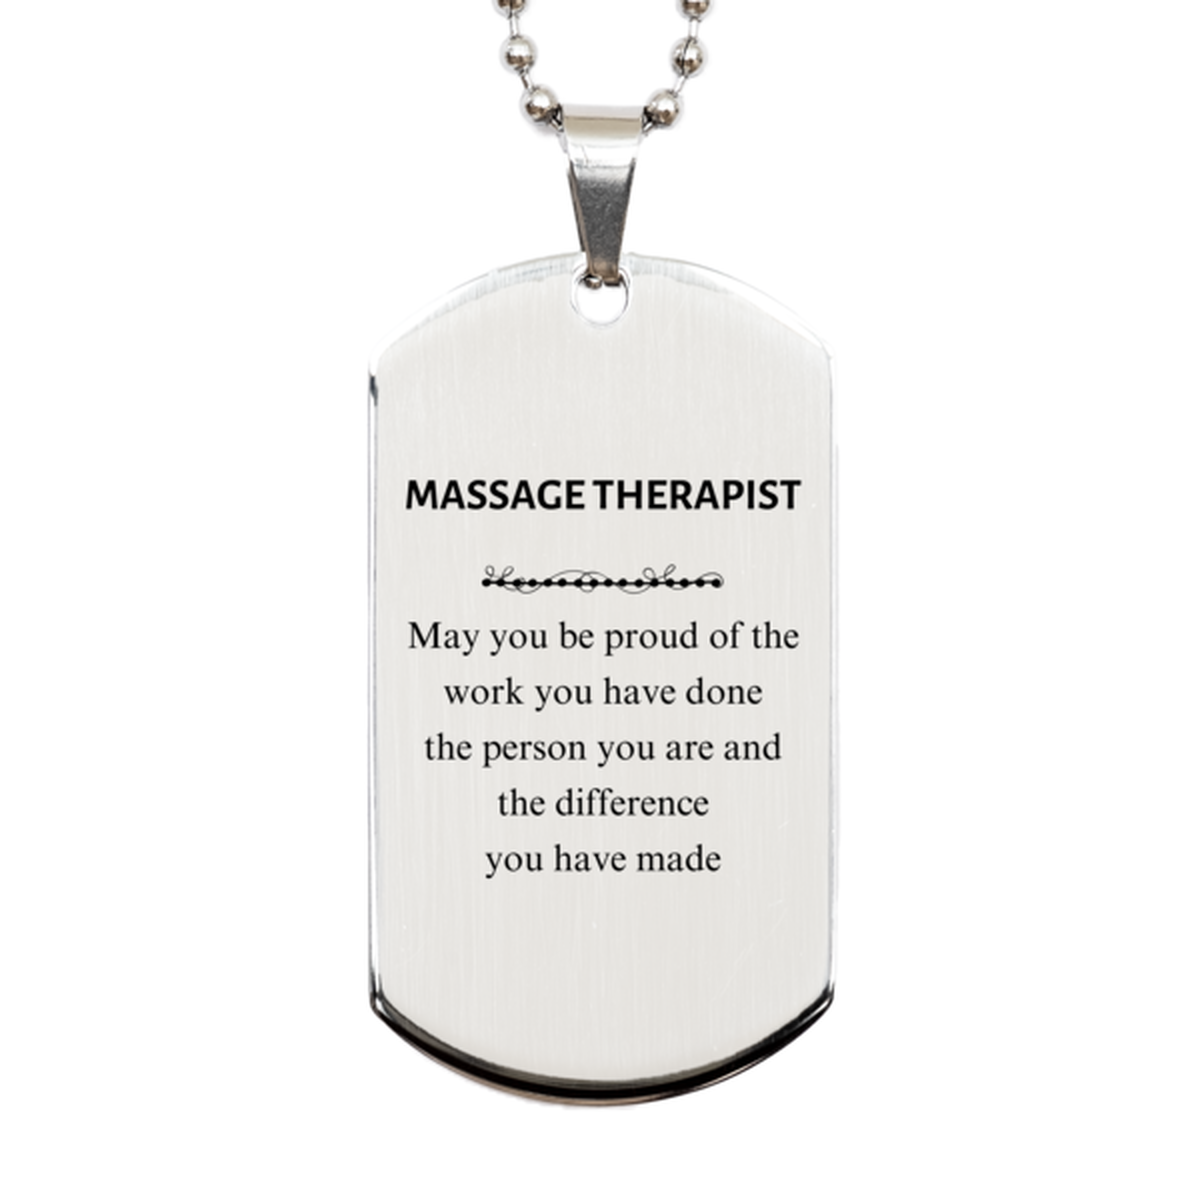 Massage Therapist May you be proud of the work you have done, Retirement Massage Therapist Silver Dog Tag for Colleague Appreciation Gifts Amazing for Massage Therapist